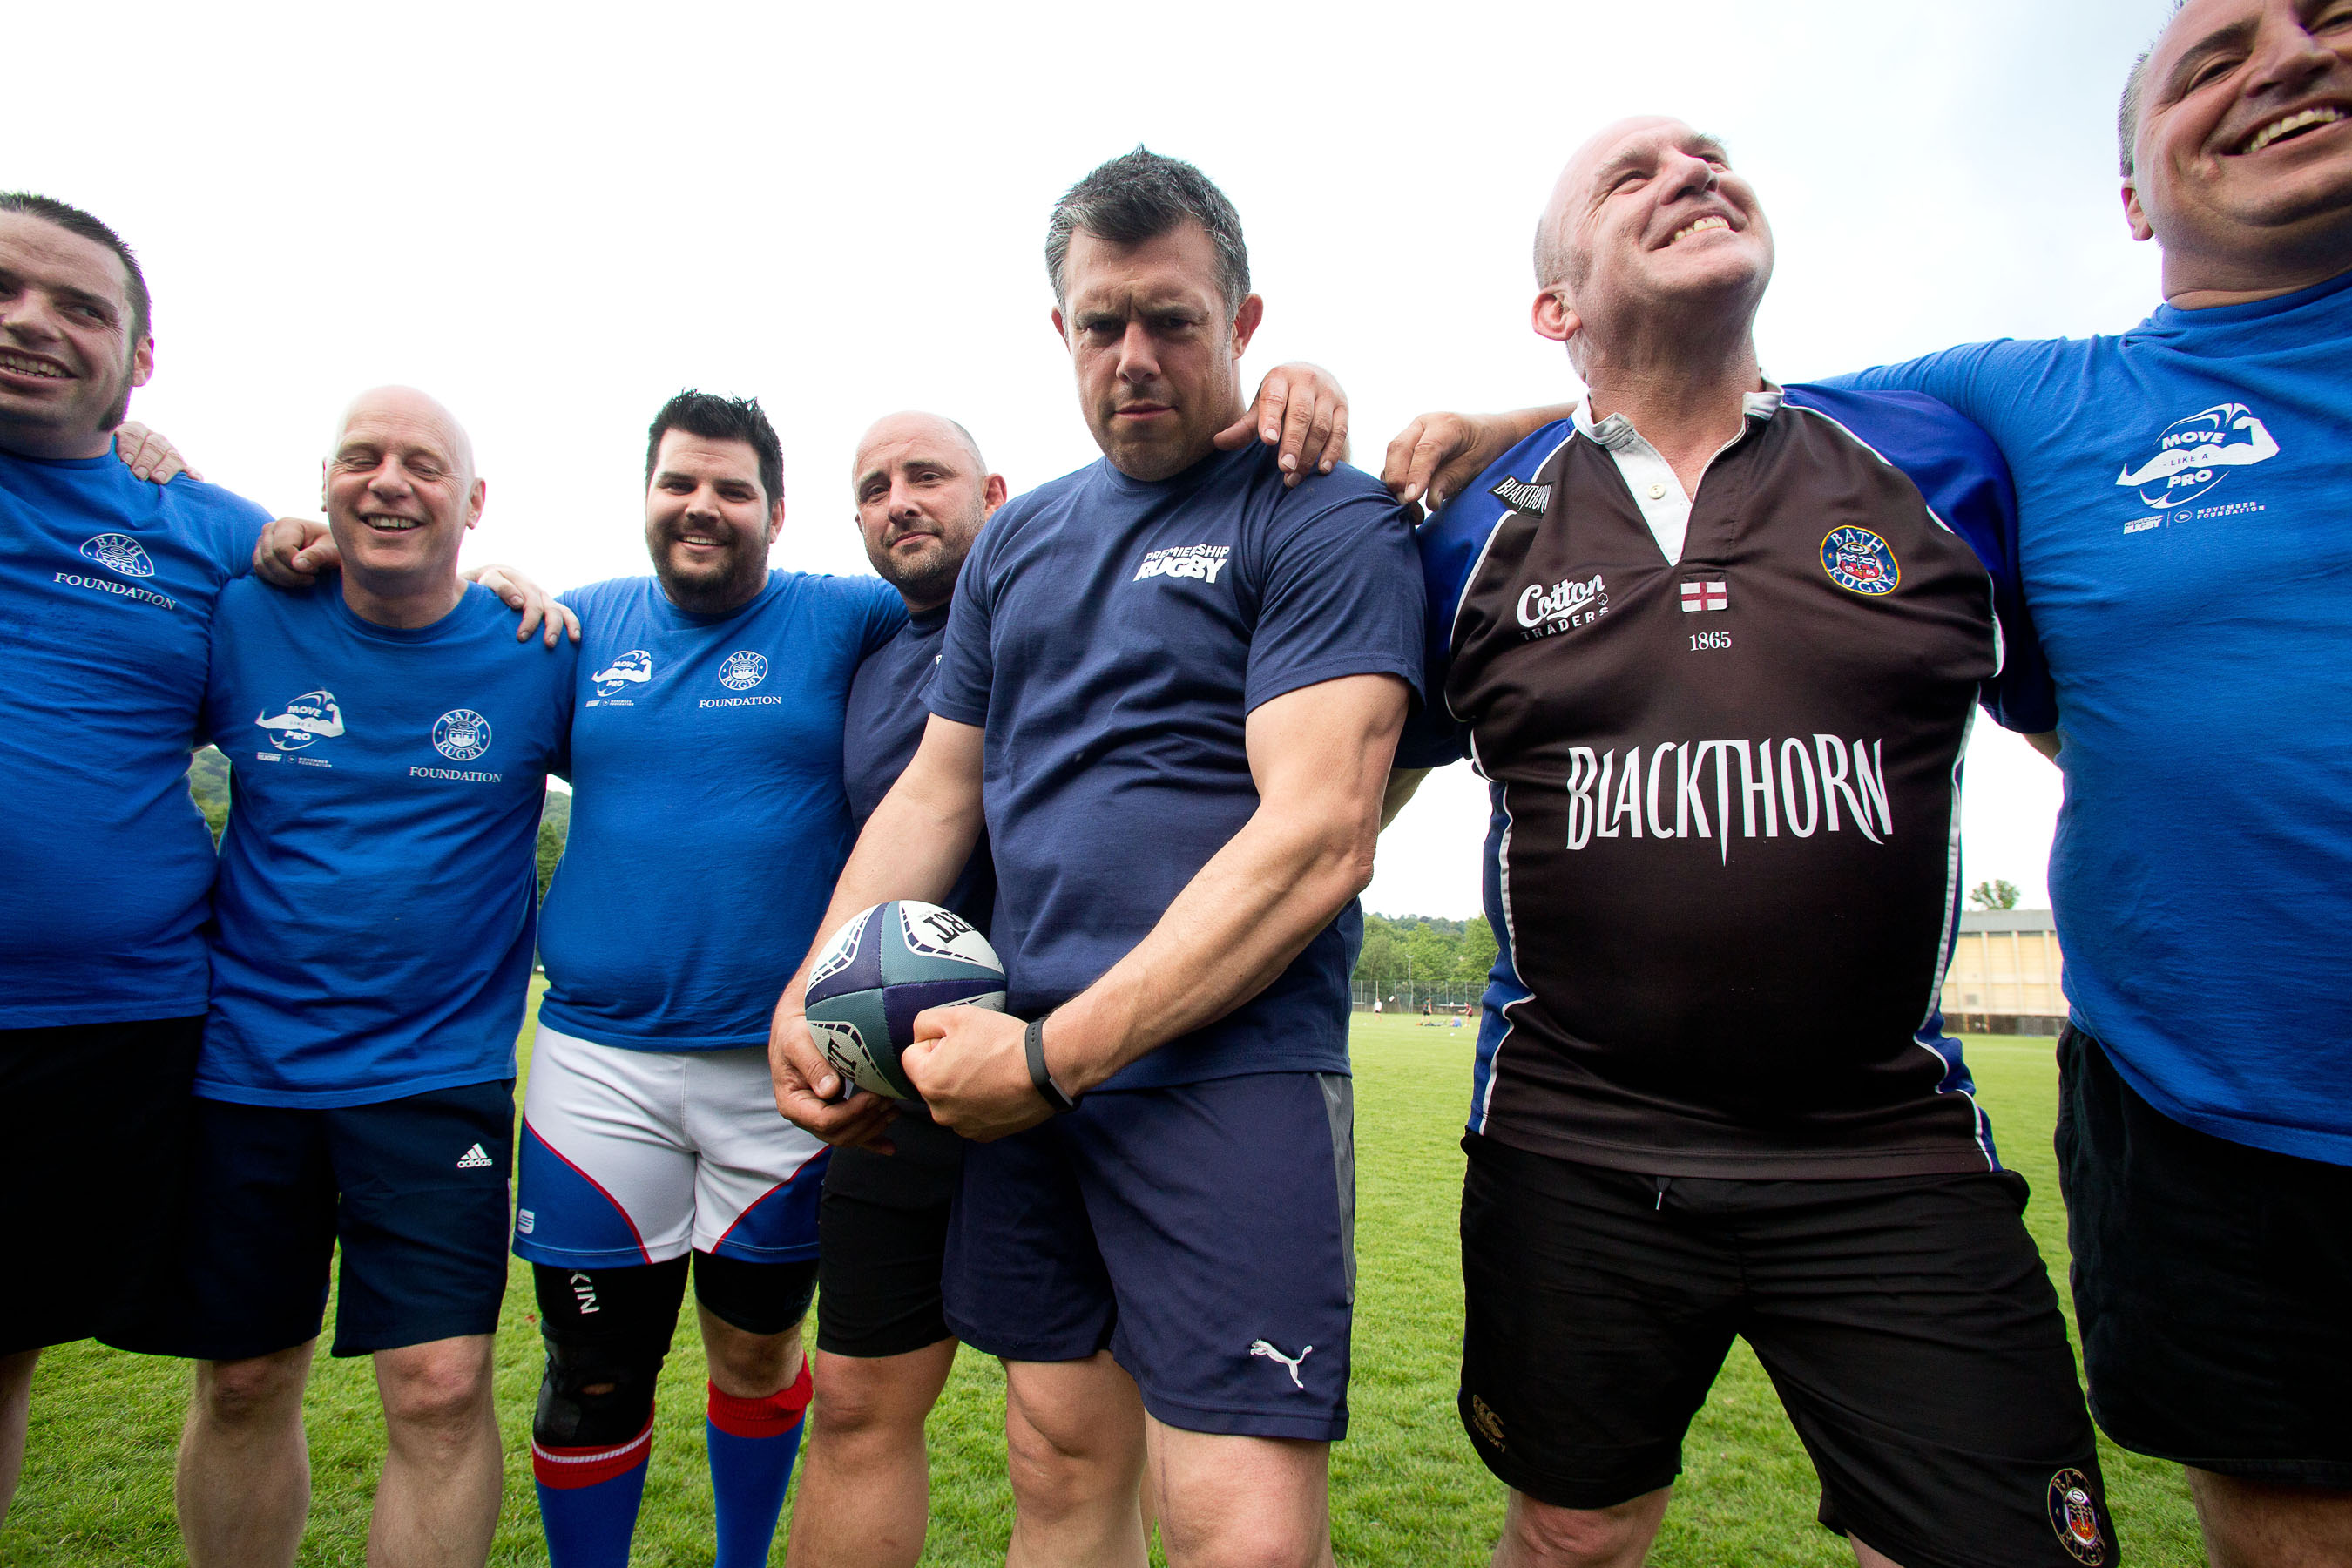 Bath Rugby legends do battle in charity tag rugby at the Rec